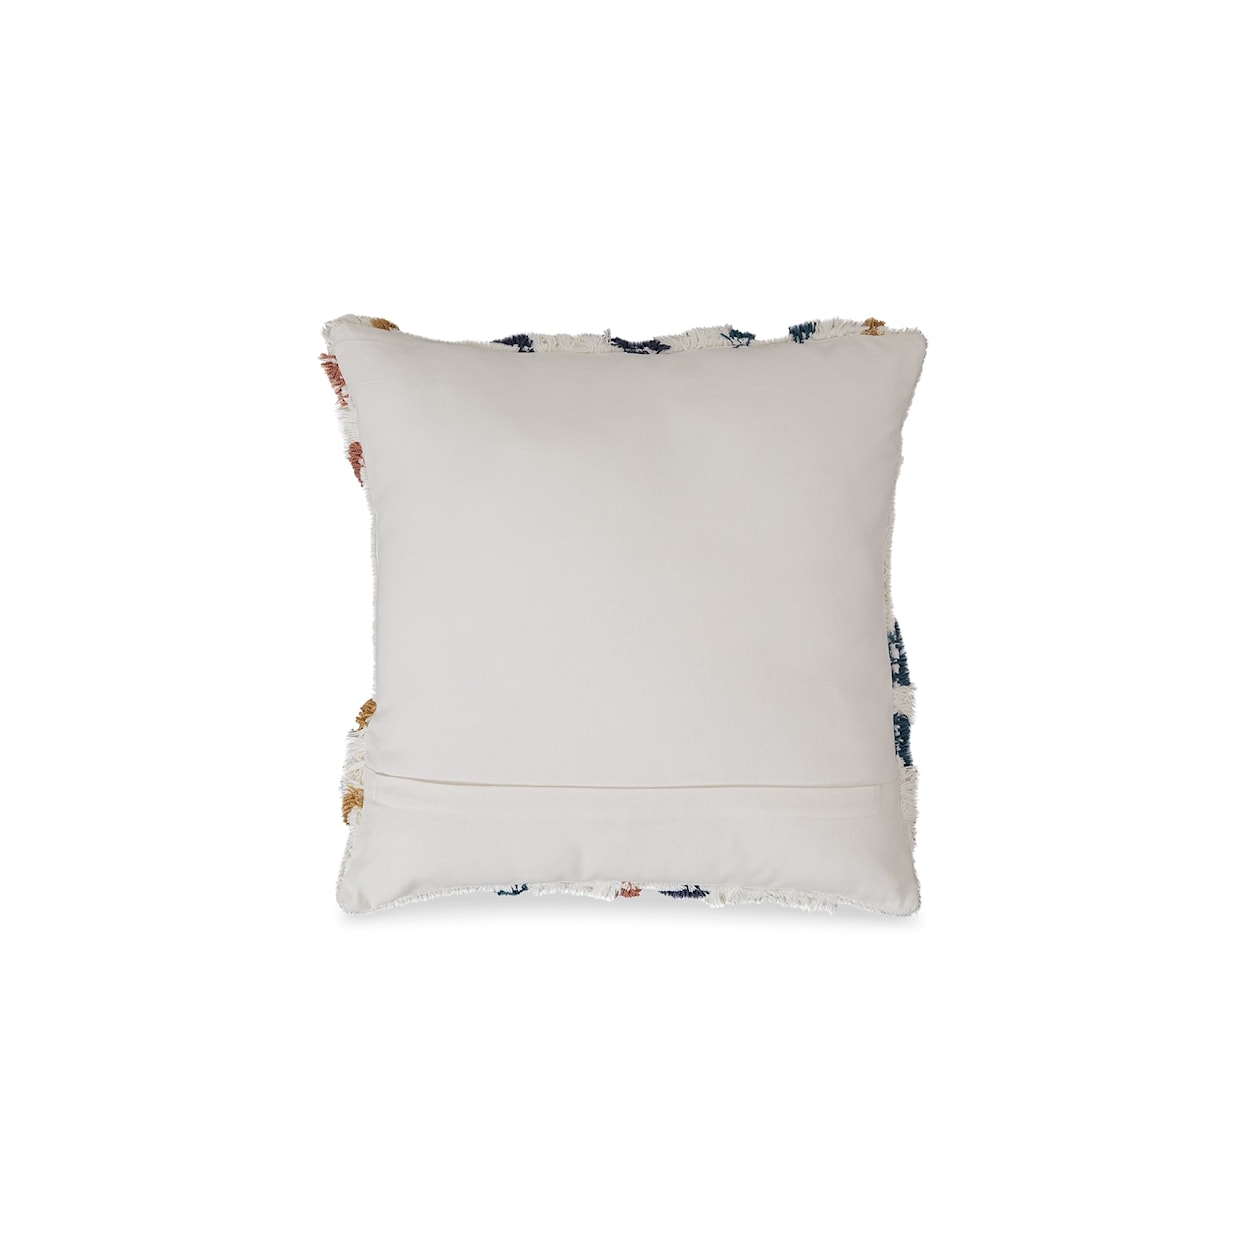 Signature Design by Ashley Evermore Pillow (Set of 4)